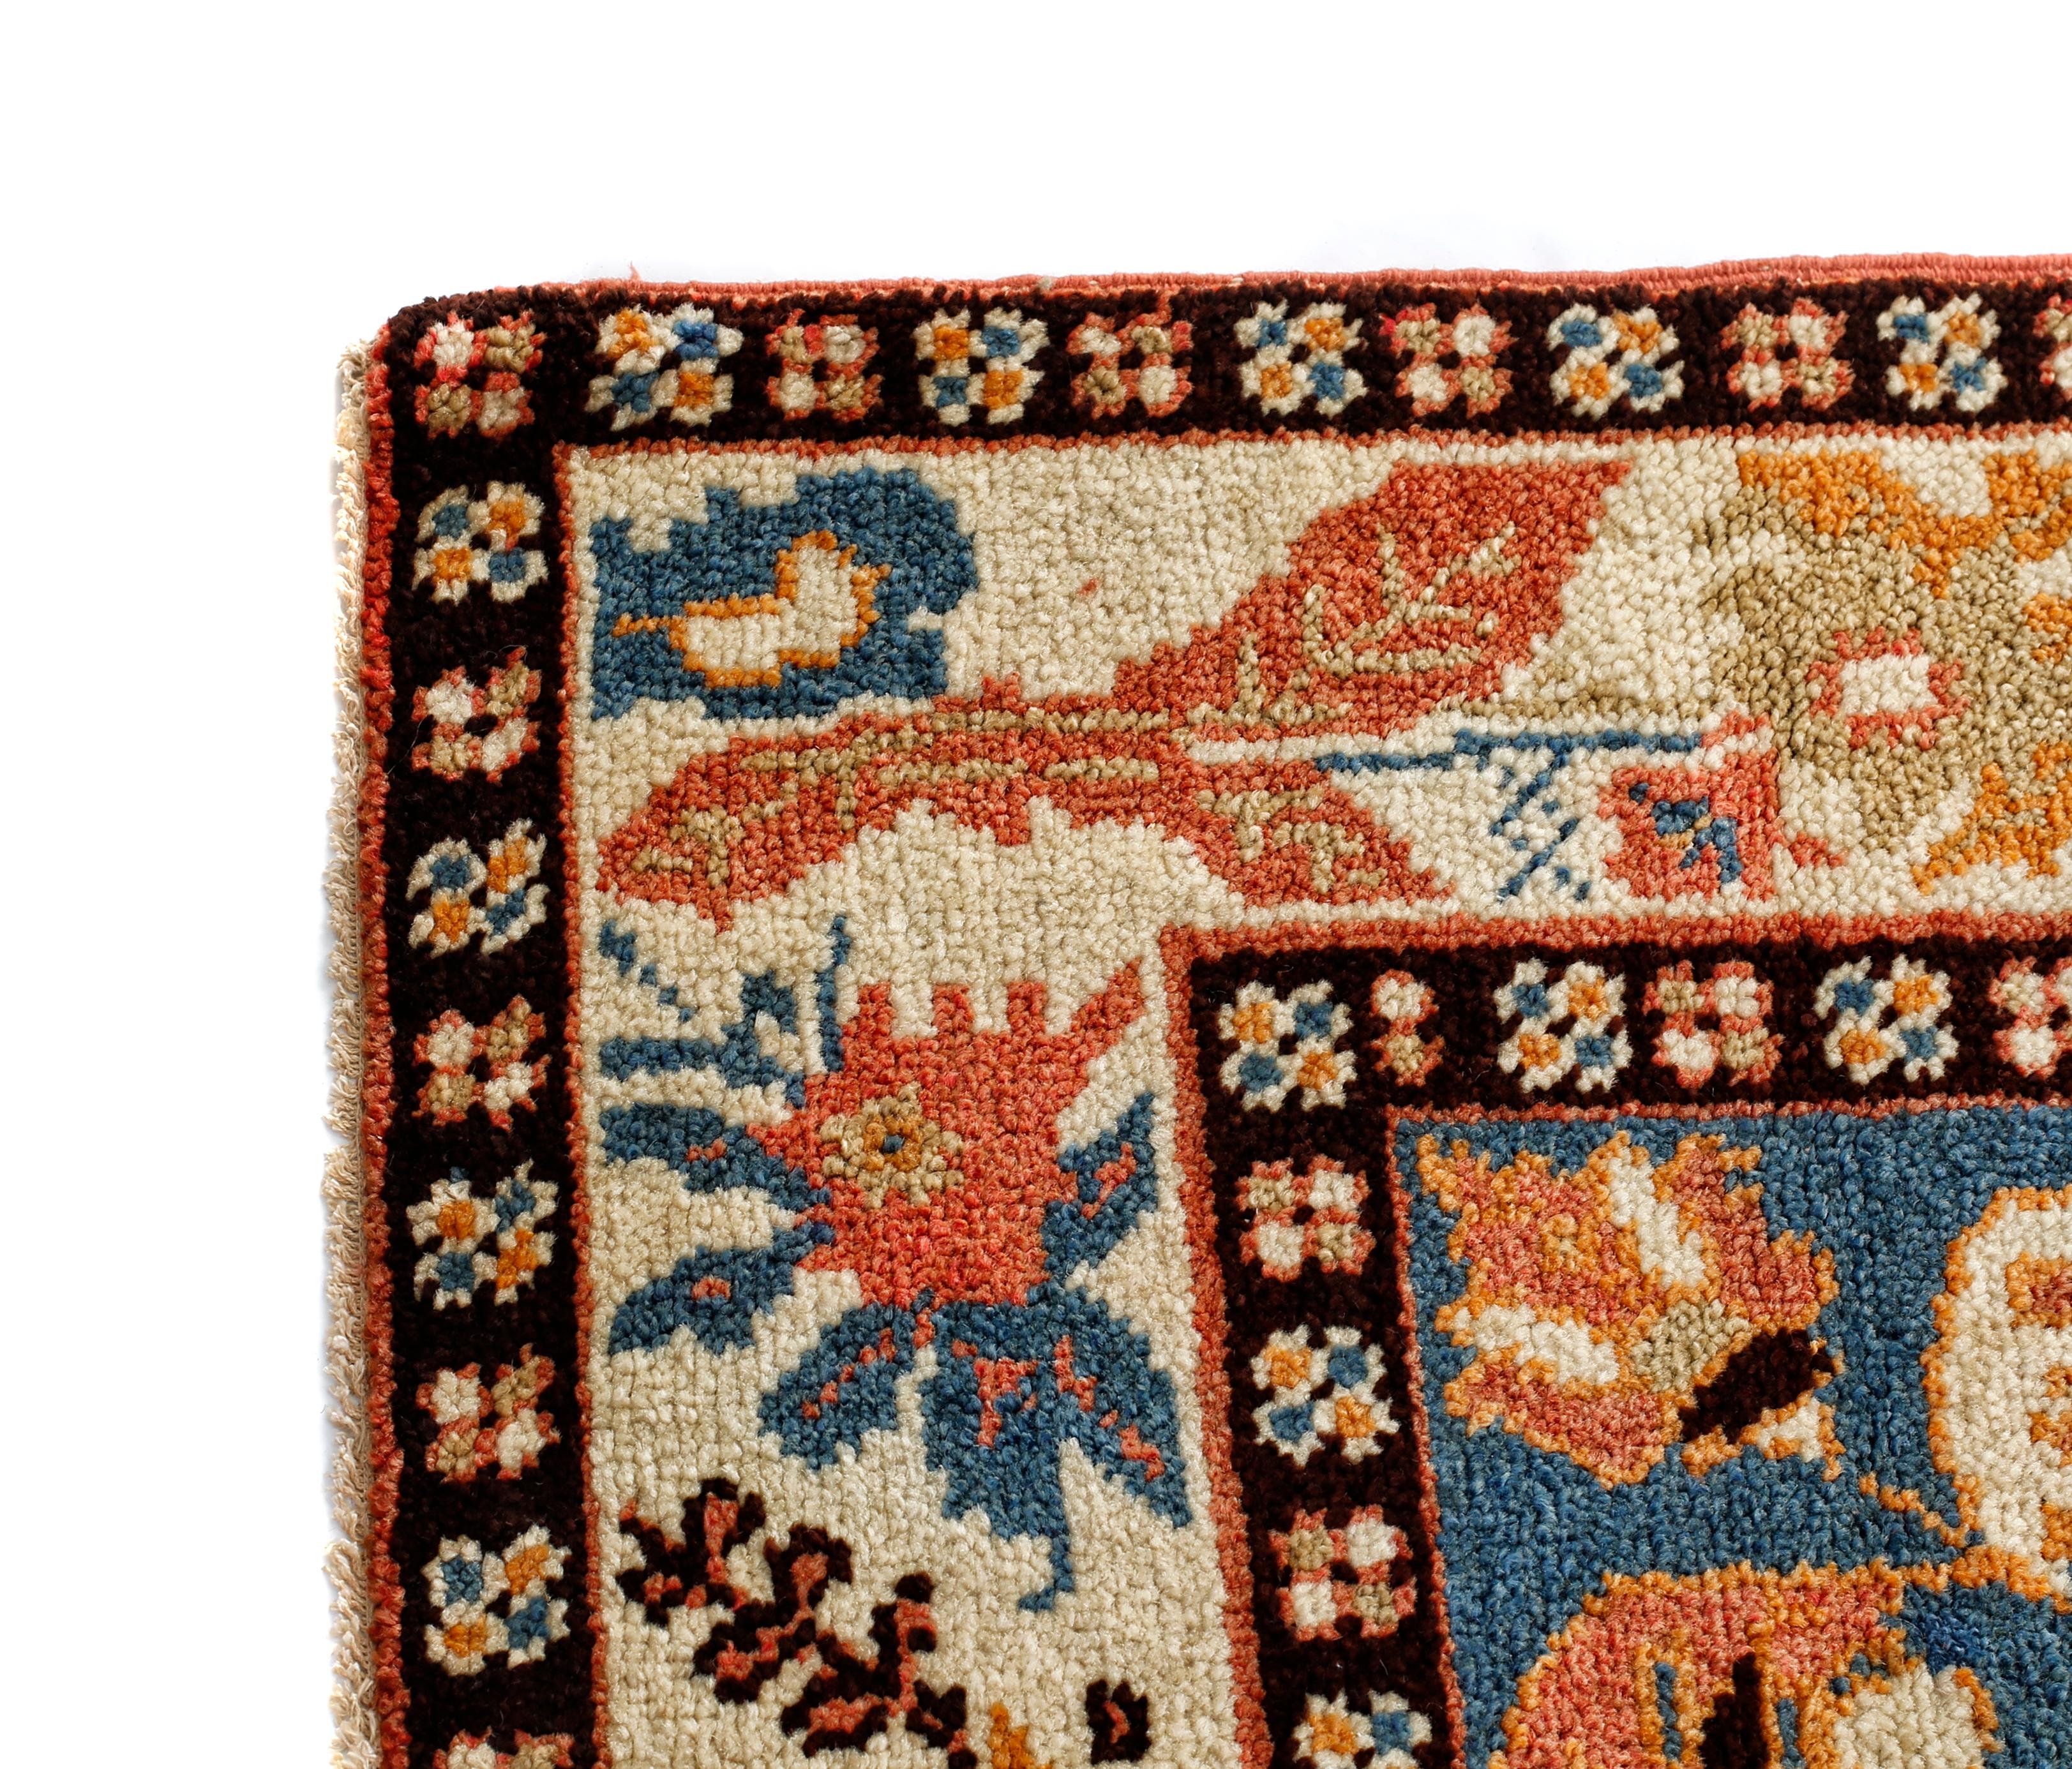 Anatolian rugs are hand knotted in the Central Anatolia or Asia minor region of Turkey. The patterns are from Ottoman era as well as modern Turkey. The central medallion used in this rug symbolizes the central authority of the Ottoman Sultans. In